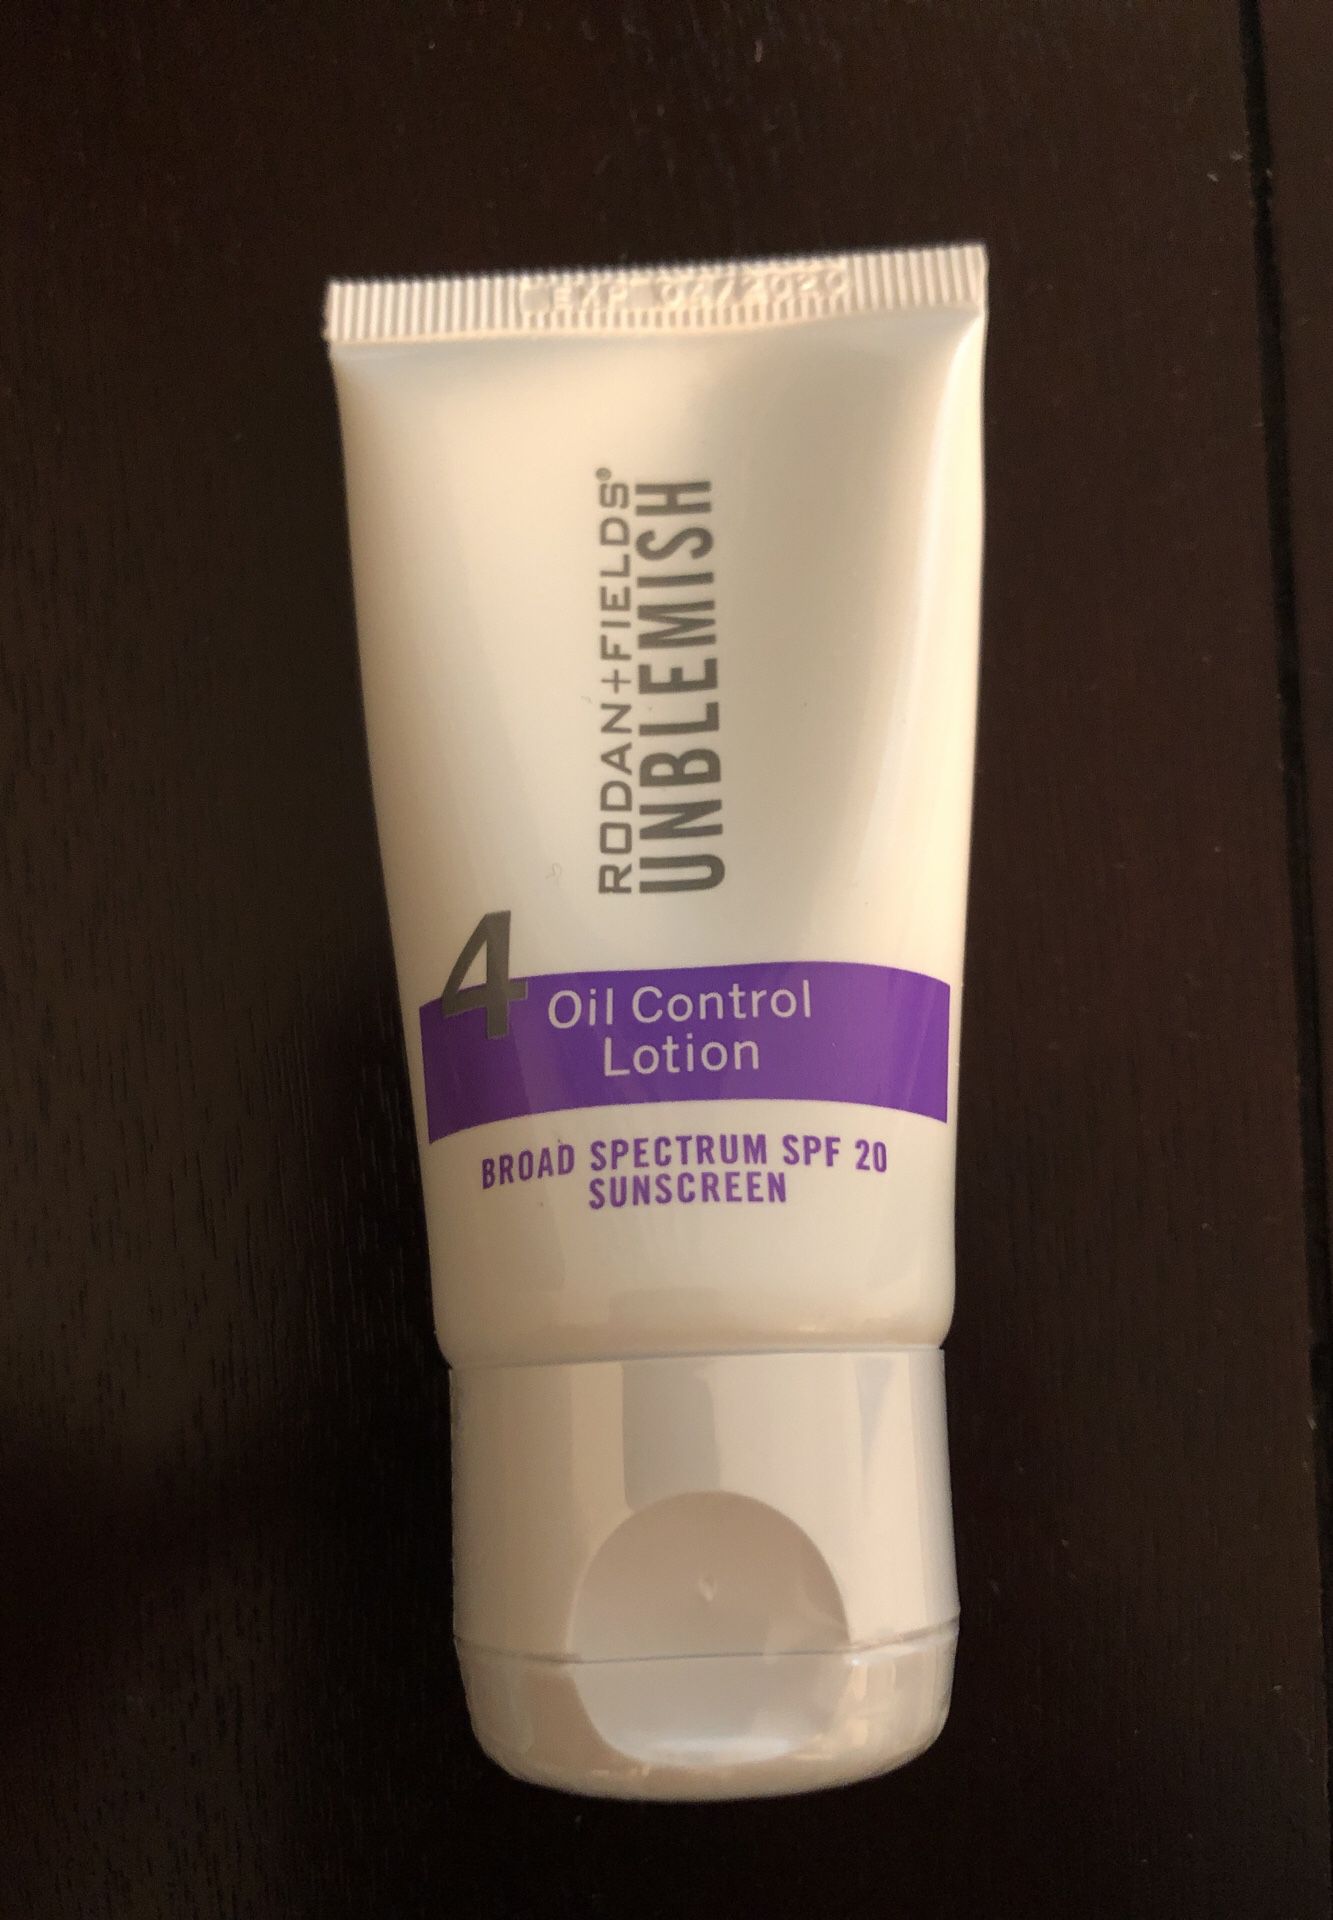 Rodan and fields oil control lotion